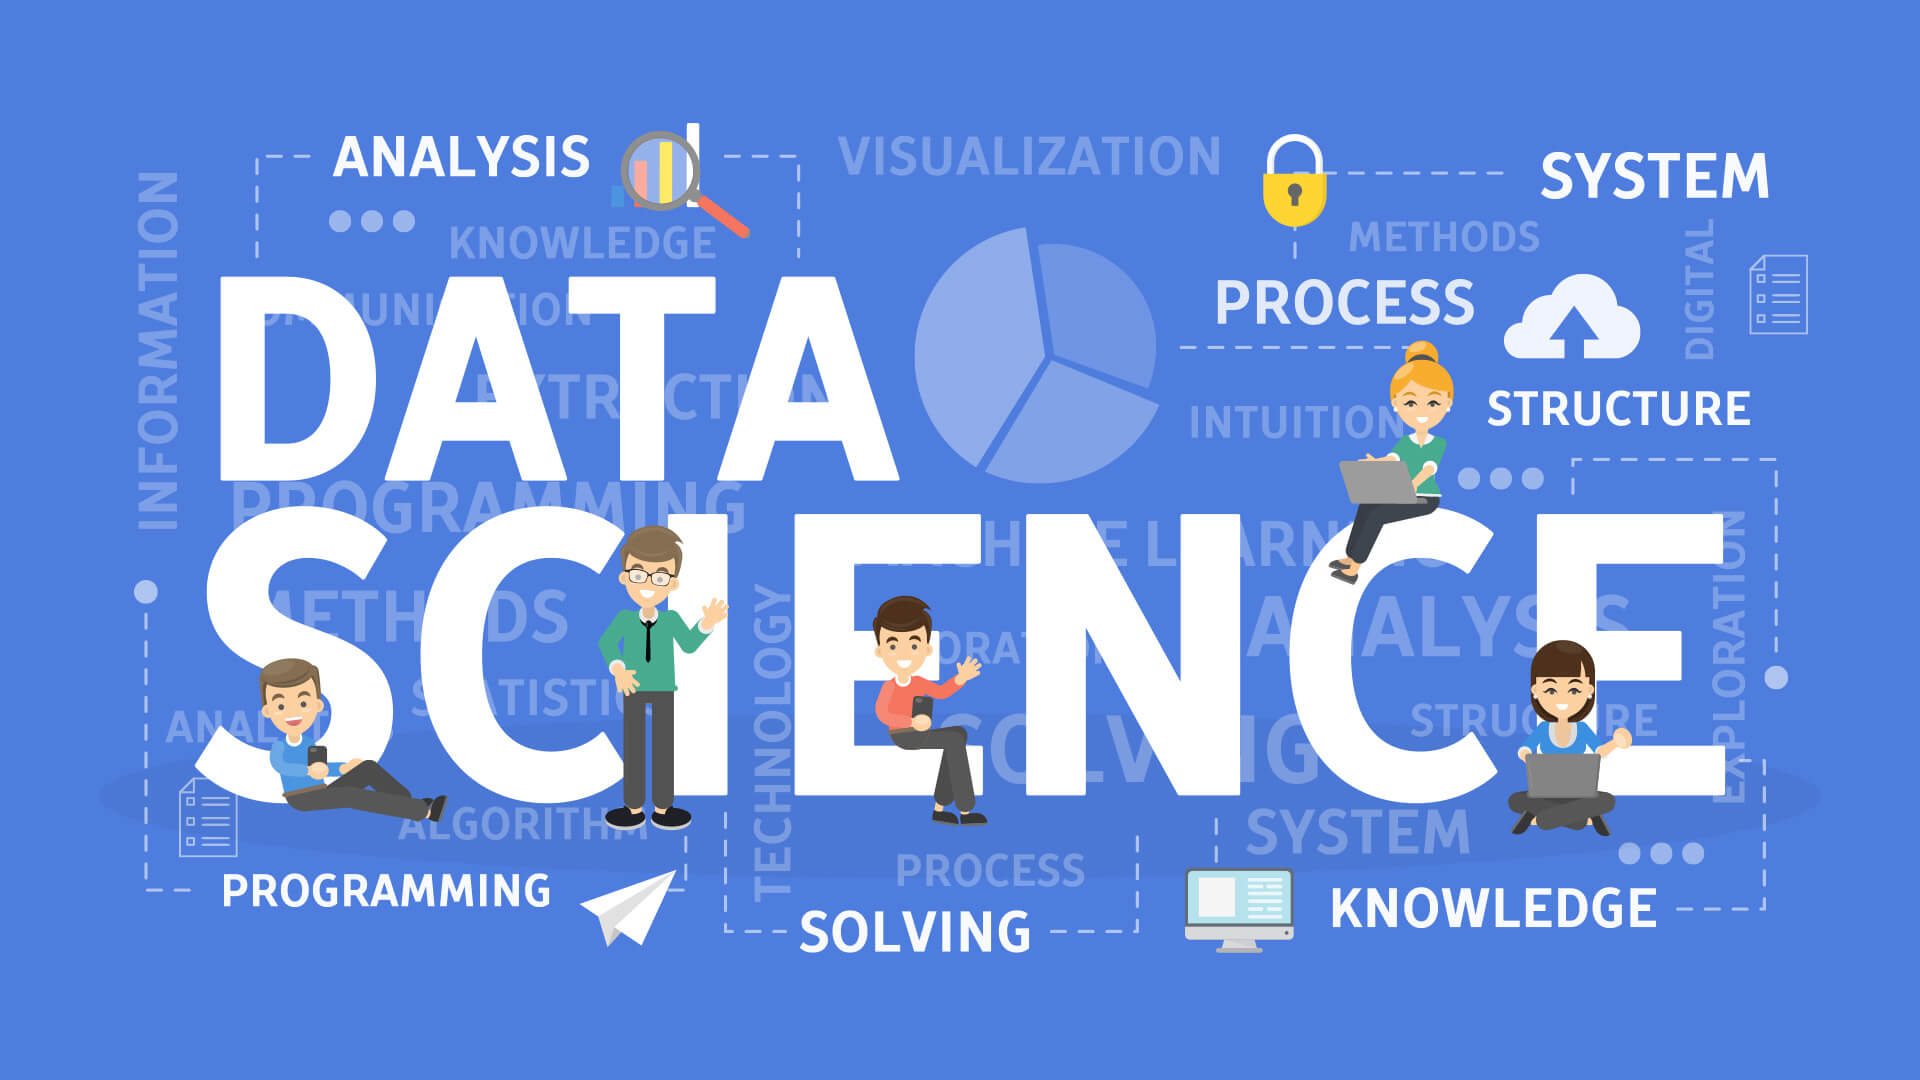 What distinguishes great data scientists from the average ones?